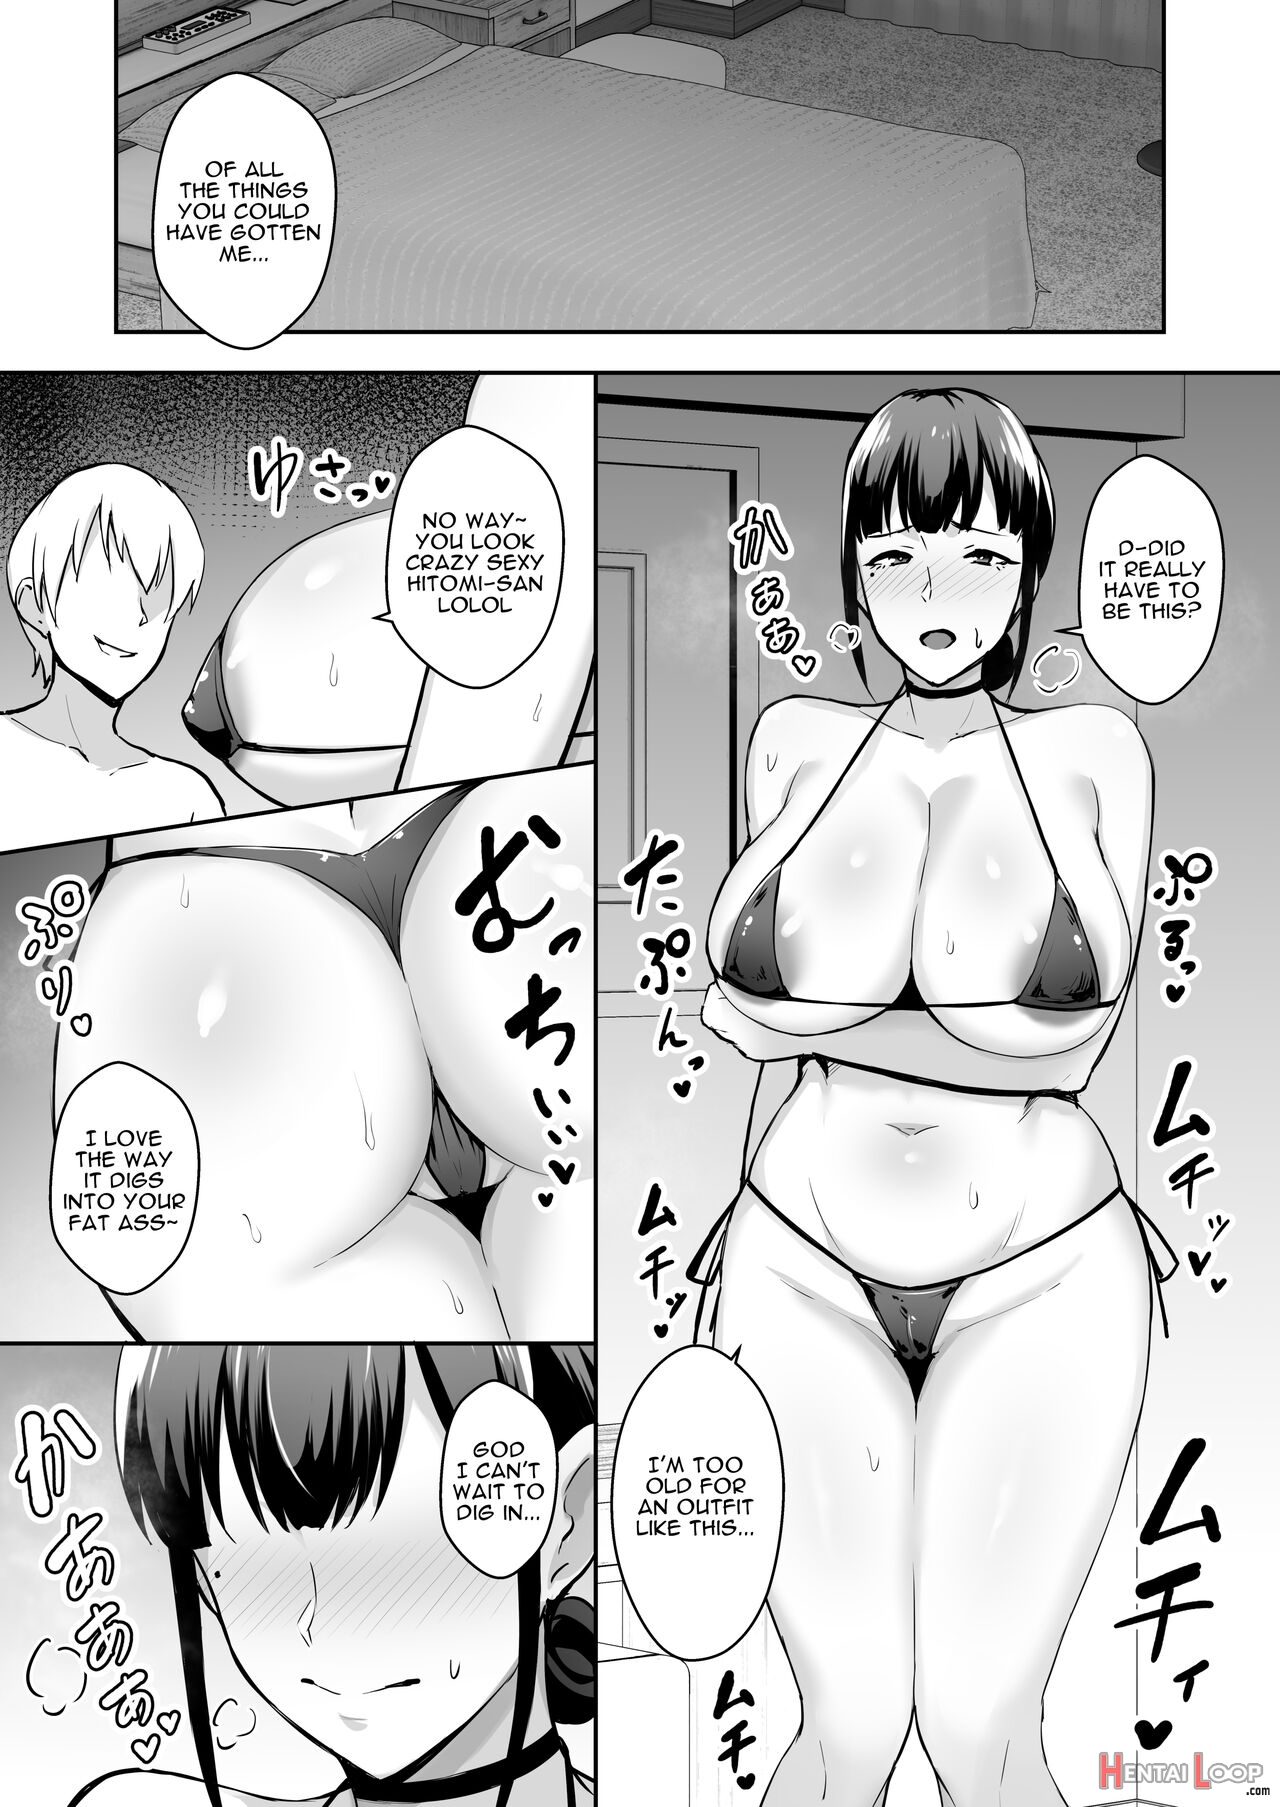 Housewife Ntr Stealing Hitomi - A Prim And Proper Housewife With Big Tits page 26